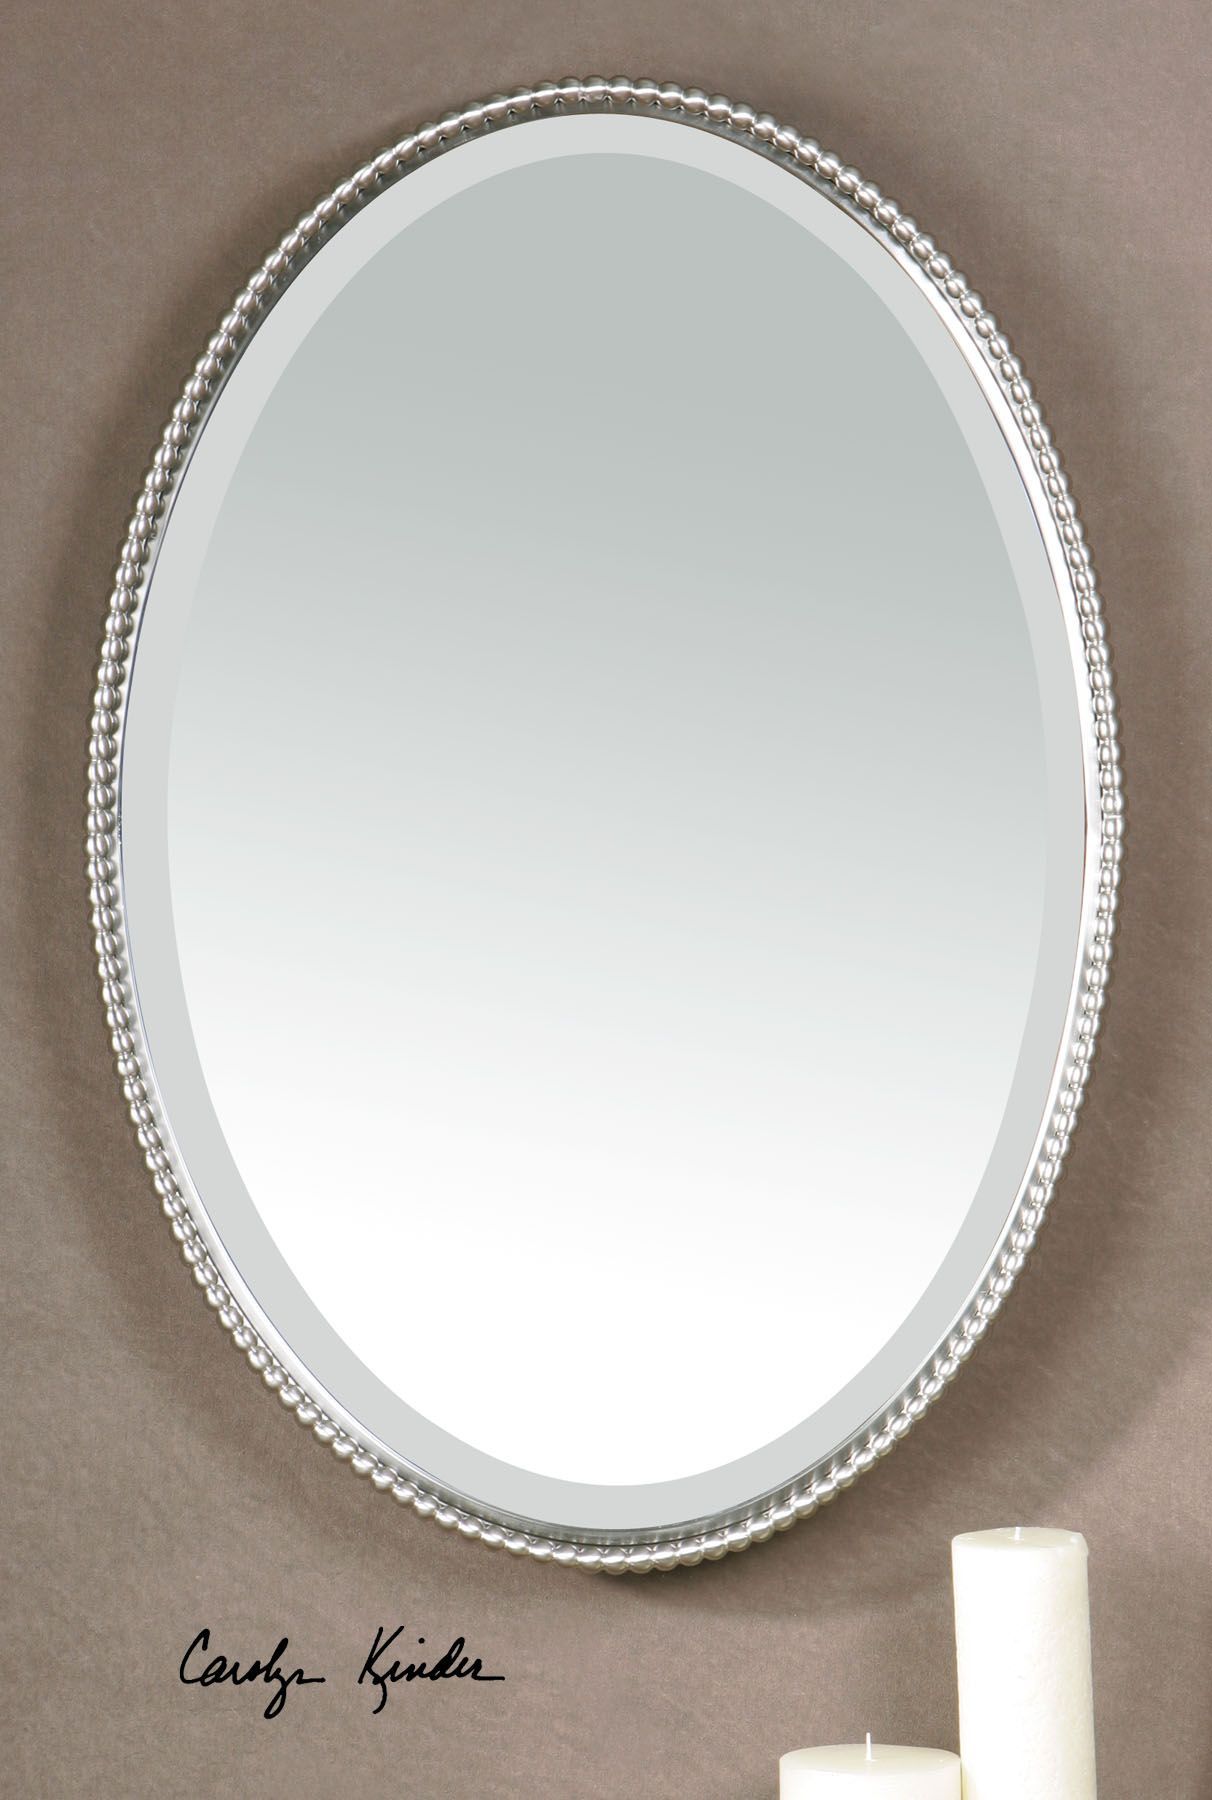 Silver Nickel Beaded Edge Oval Wall Mirror 32" Vanity Bathroom Horchow Within Round Beaded Trim Wall Mirrors (View 2 of 15)